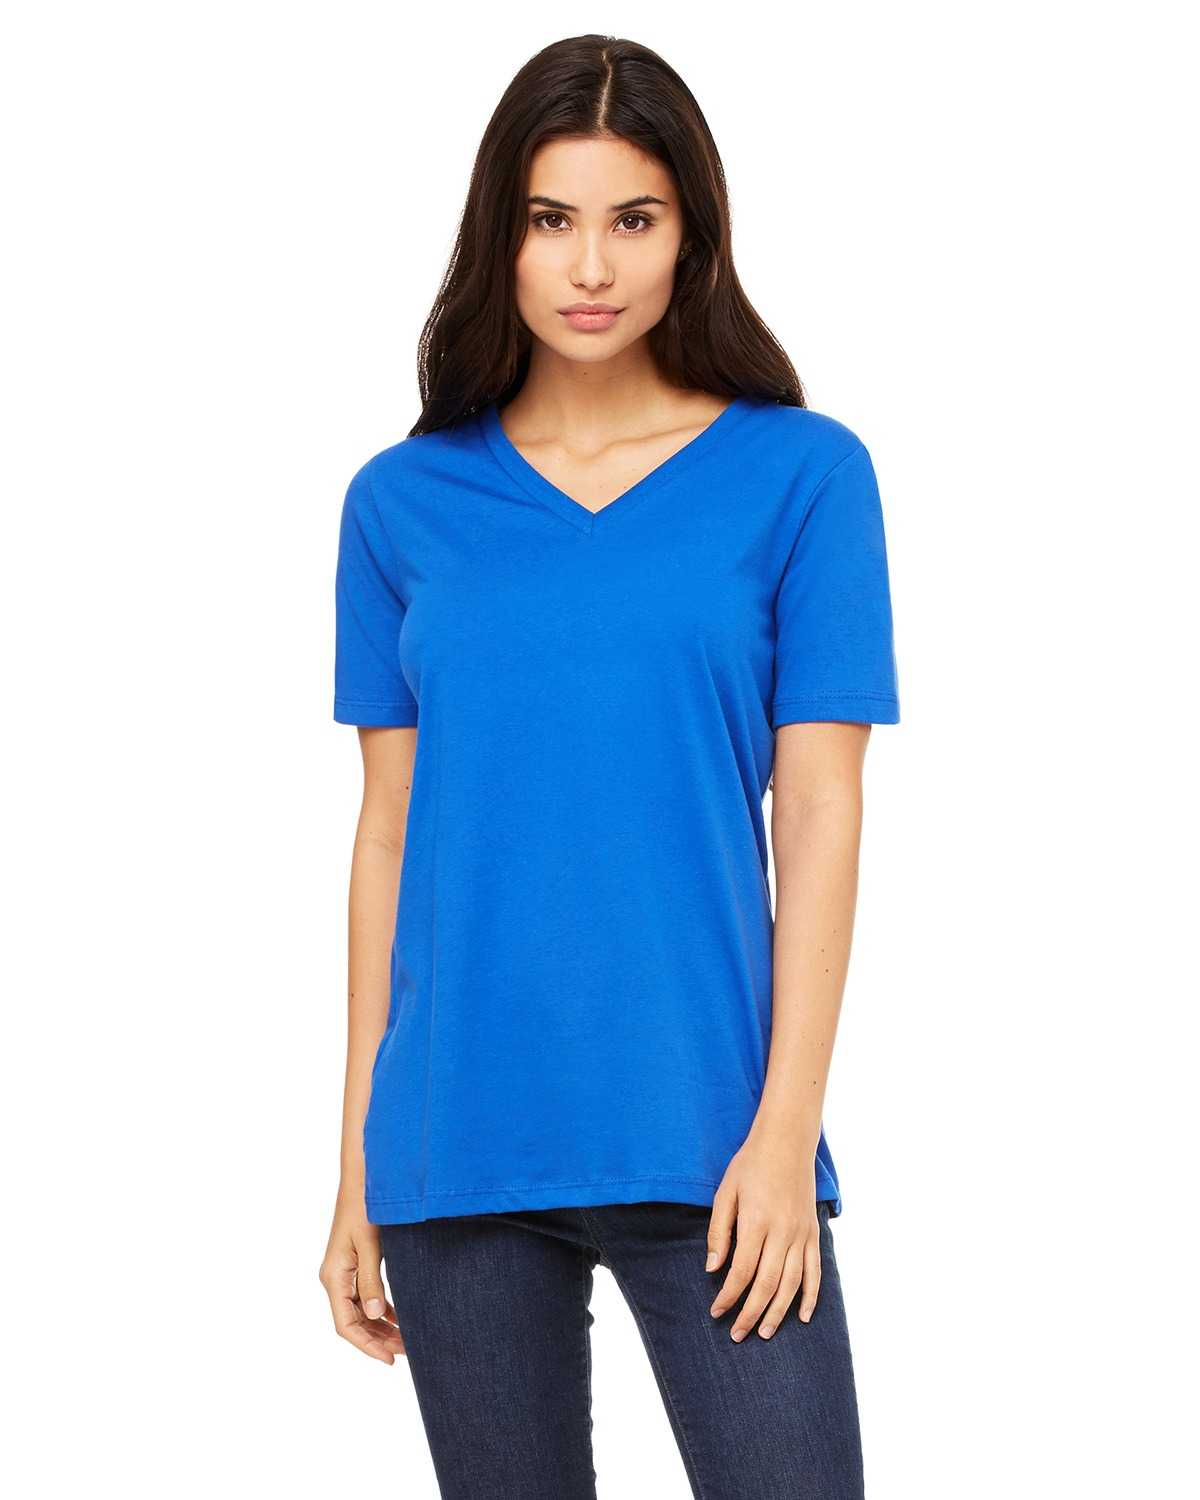 Bella + Canvas 6405 Ladies' Relaxed Jersey Short-Sleeve V-Neck T-Shirt ...